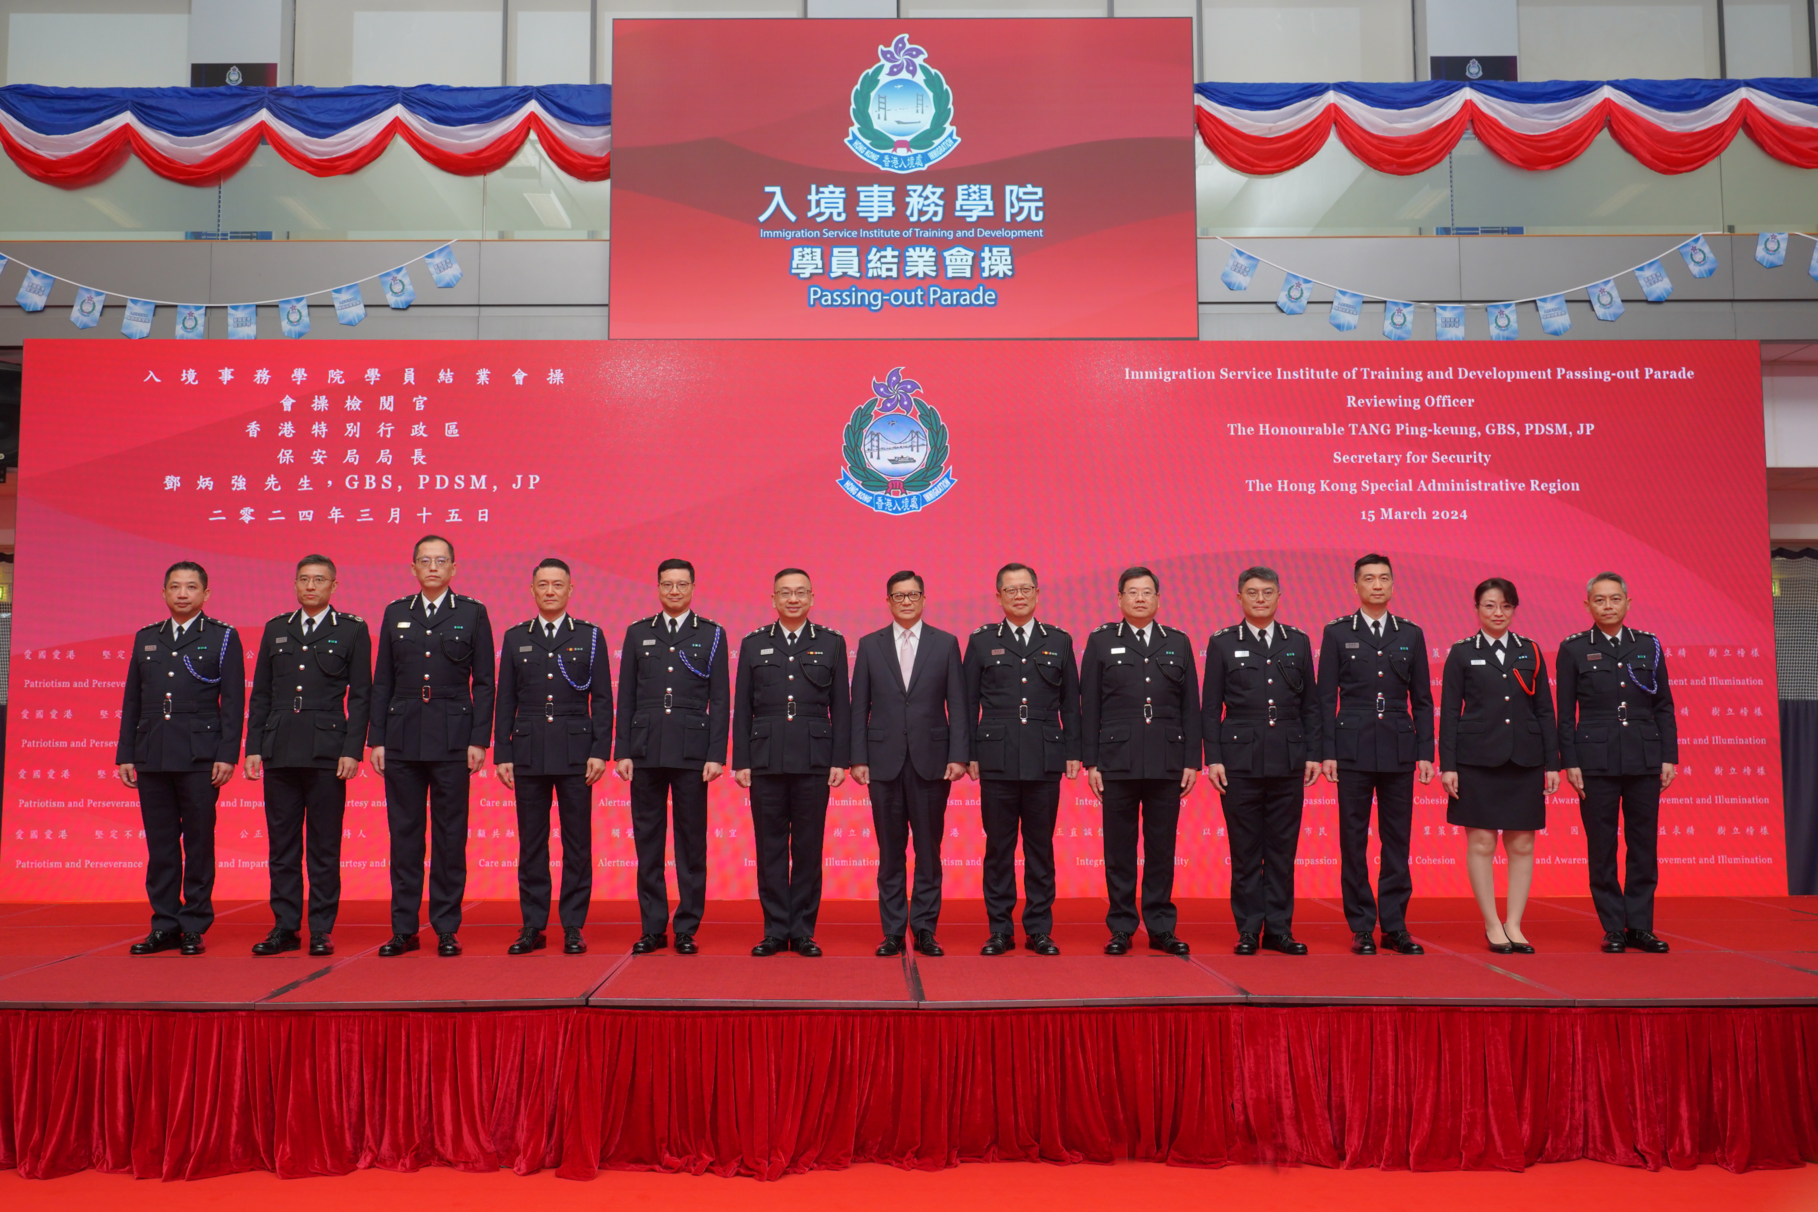 The Immigration Service Institute of Training and Development Passing-out Parade was held today (March 15). Photo shows the Secretary for Security, Mr Tang Ping-keung (seventh right), with directorate officers of the Immigration Department after the parade.